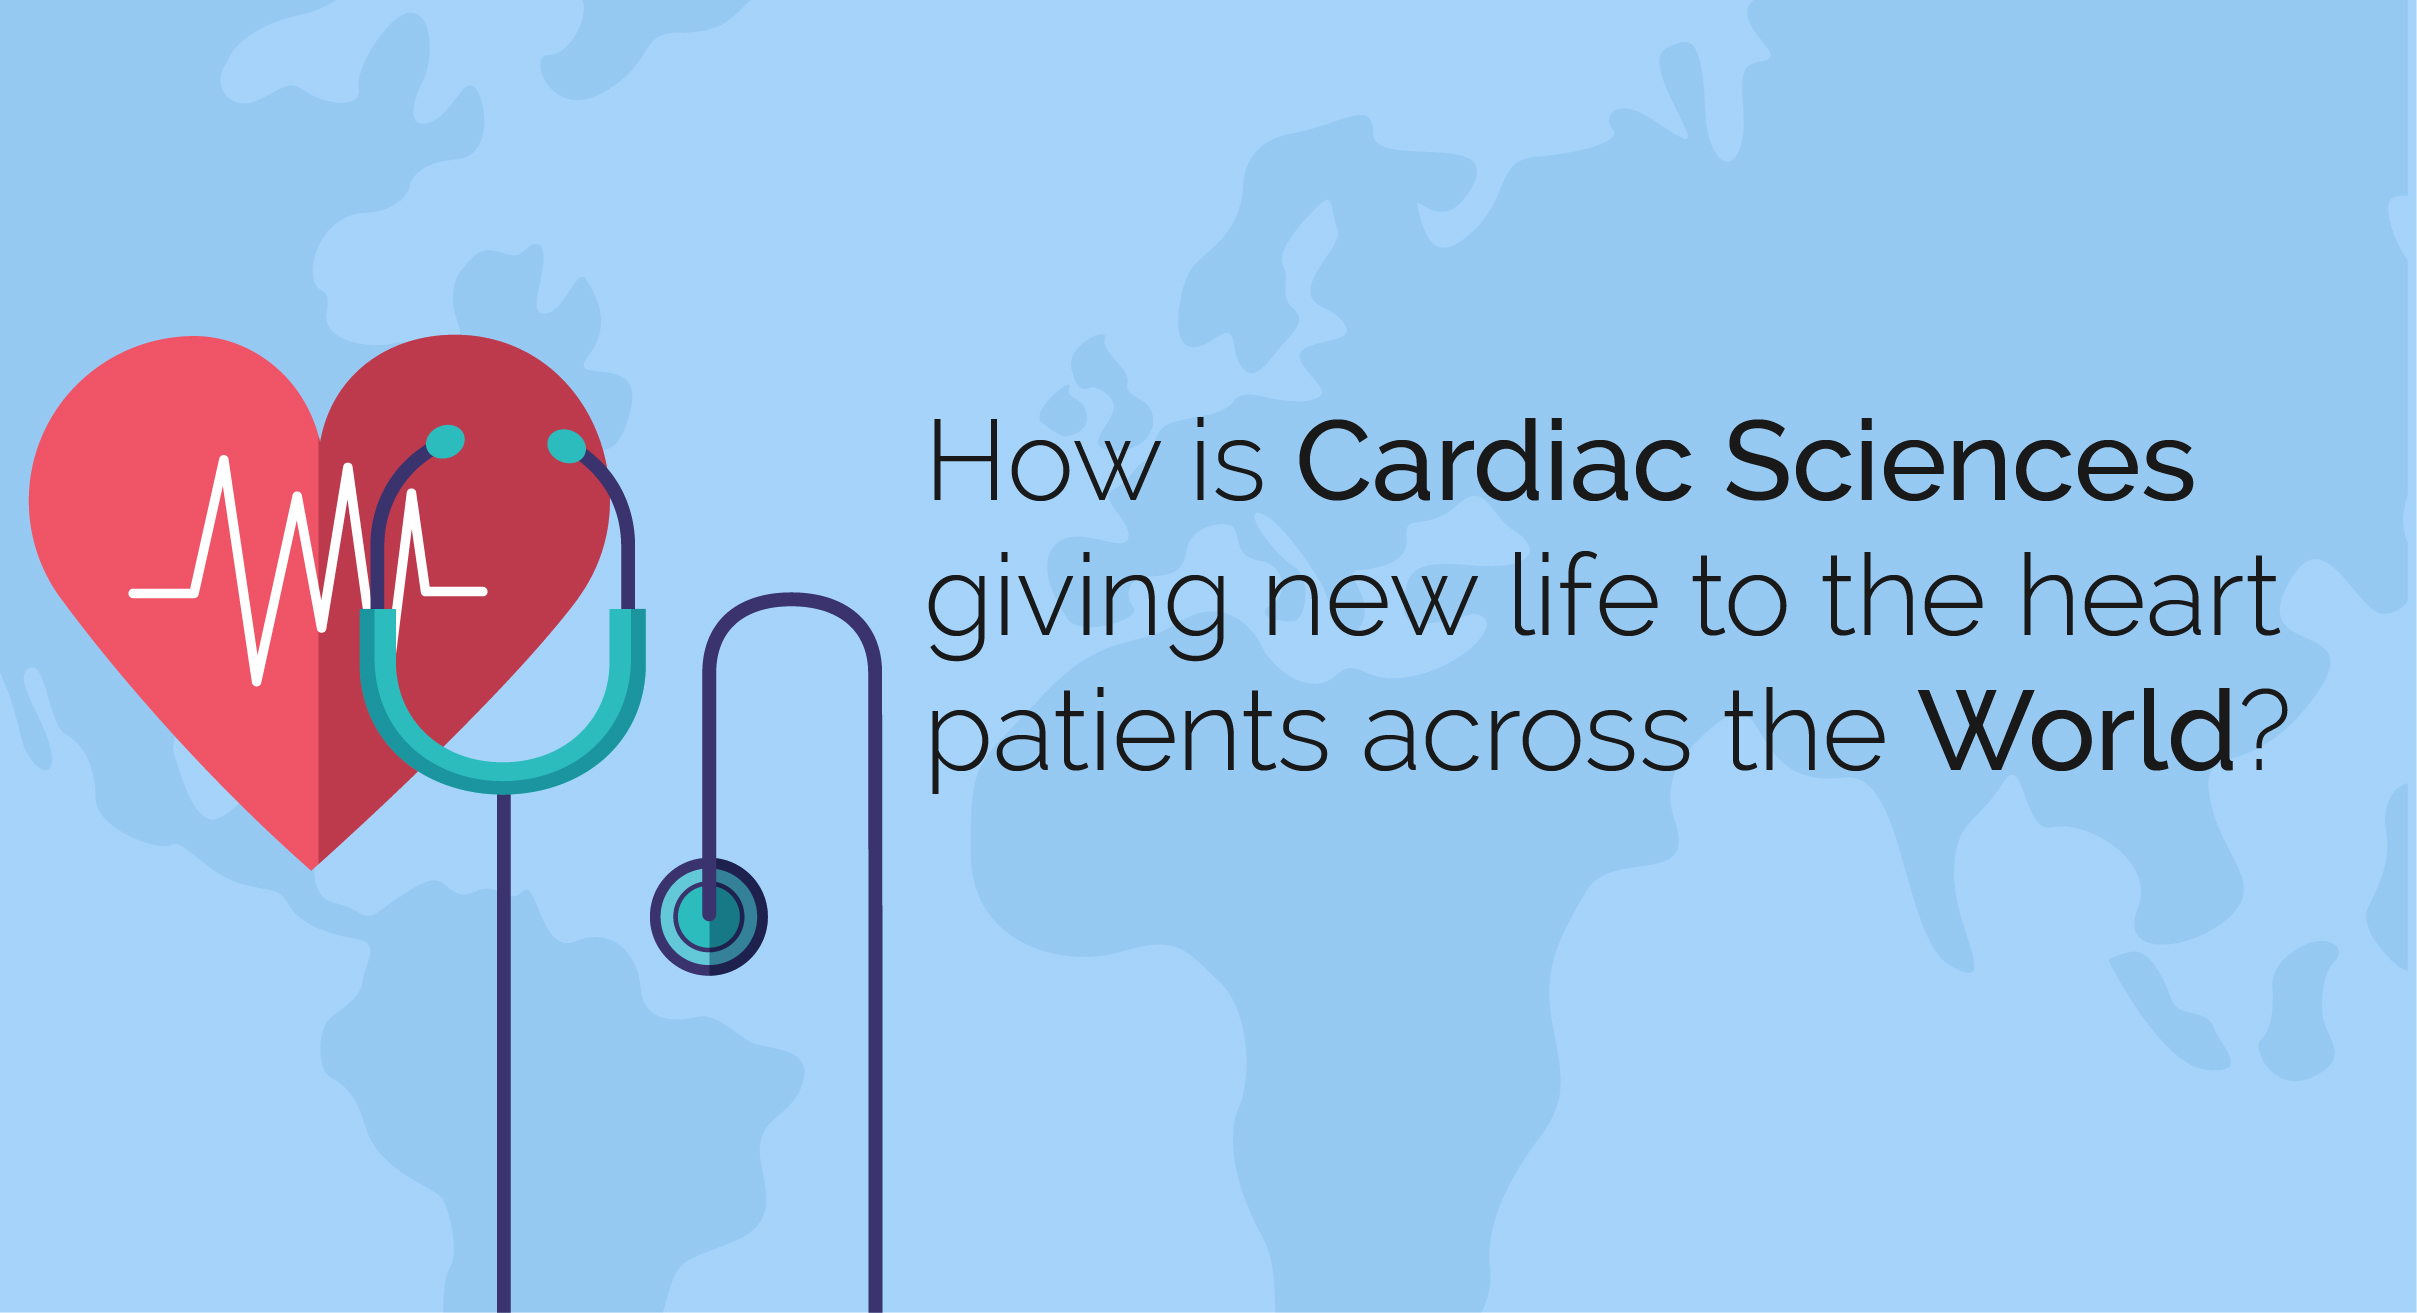 How is cardiac sciences giving new life to the heart patients across the world?